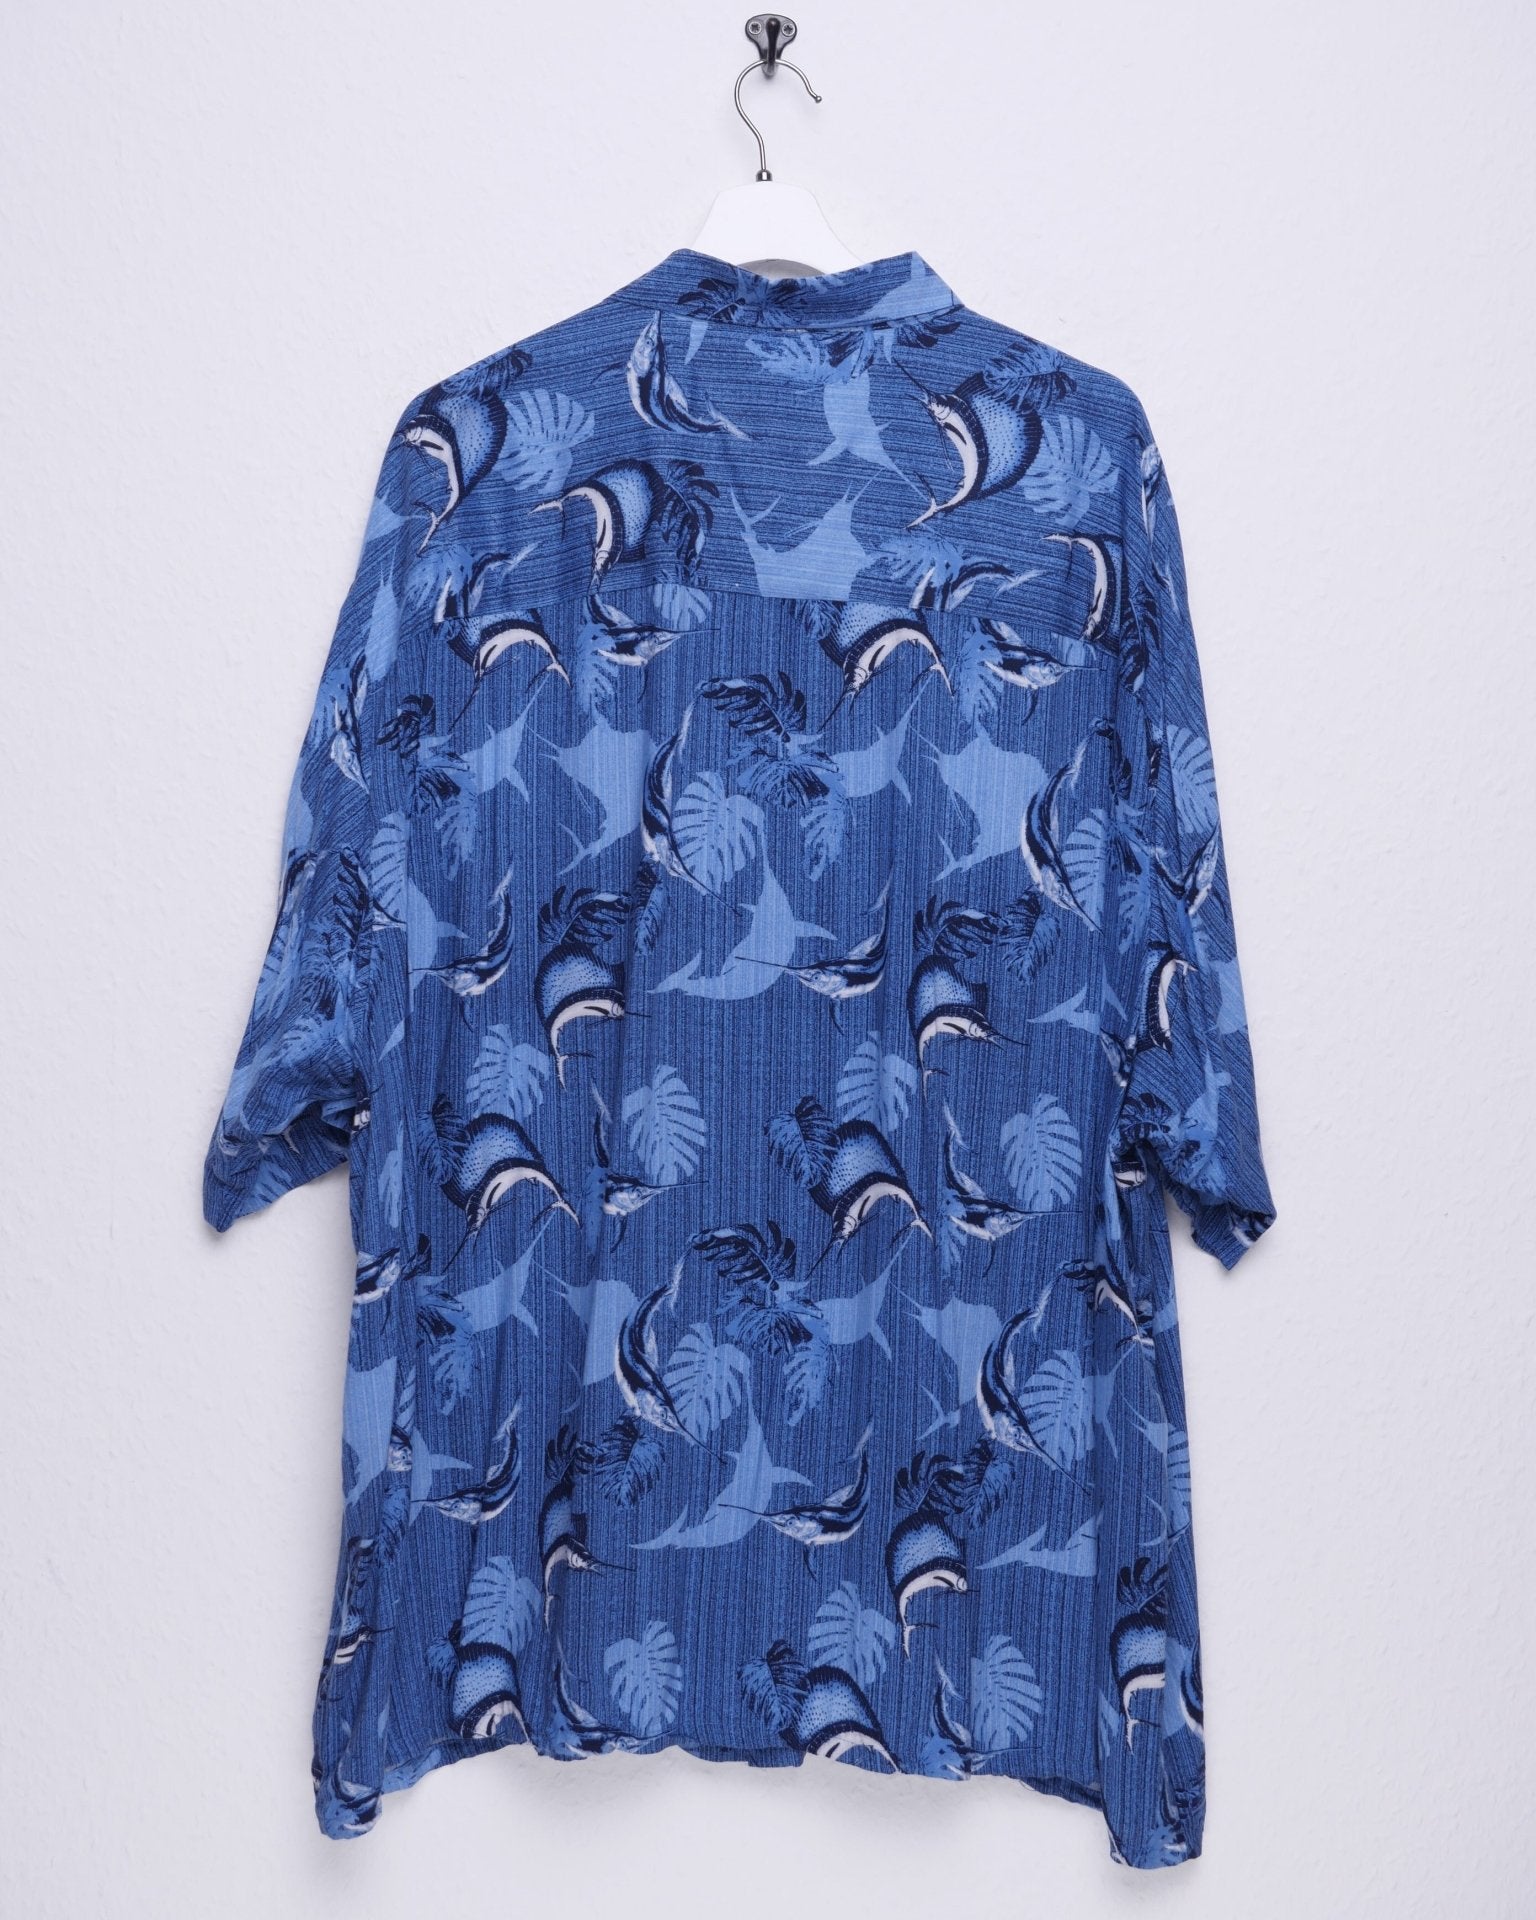 'Tropical Fish' printed Pattern blue S/S Shirt - Peeces